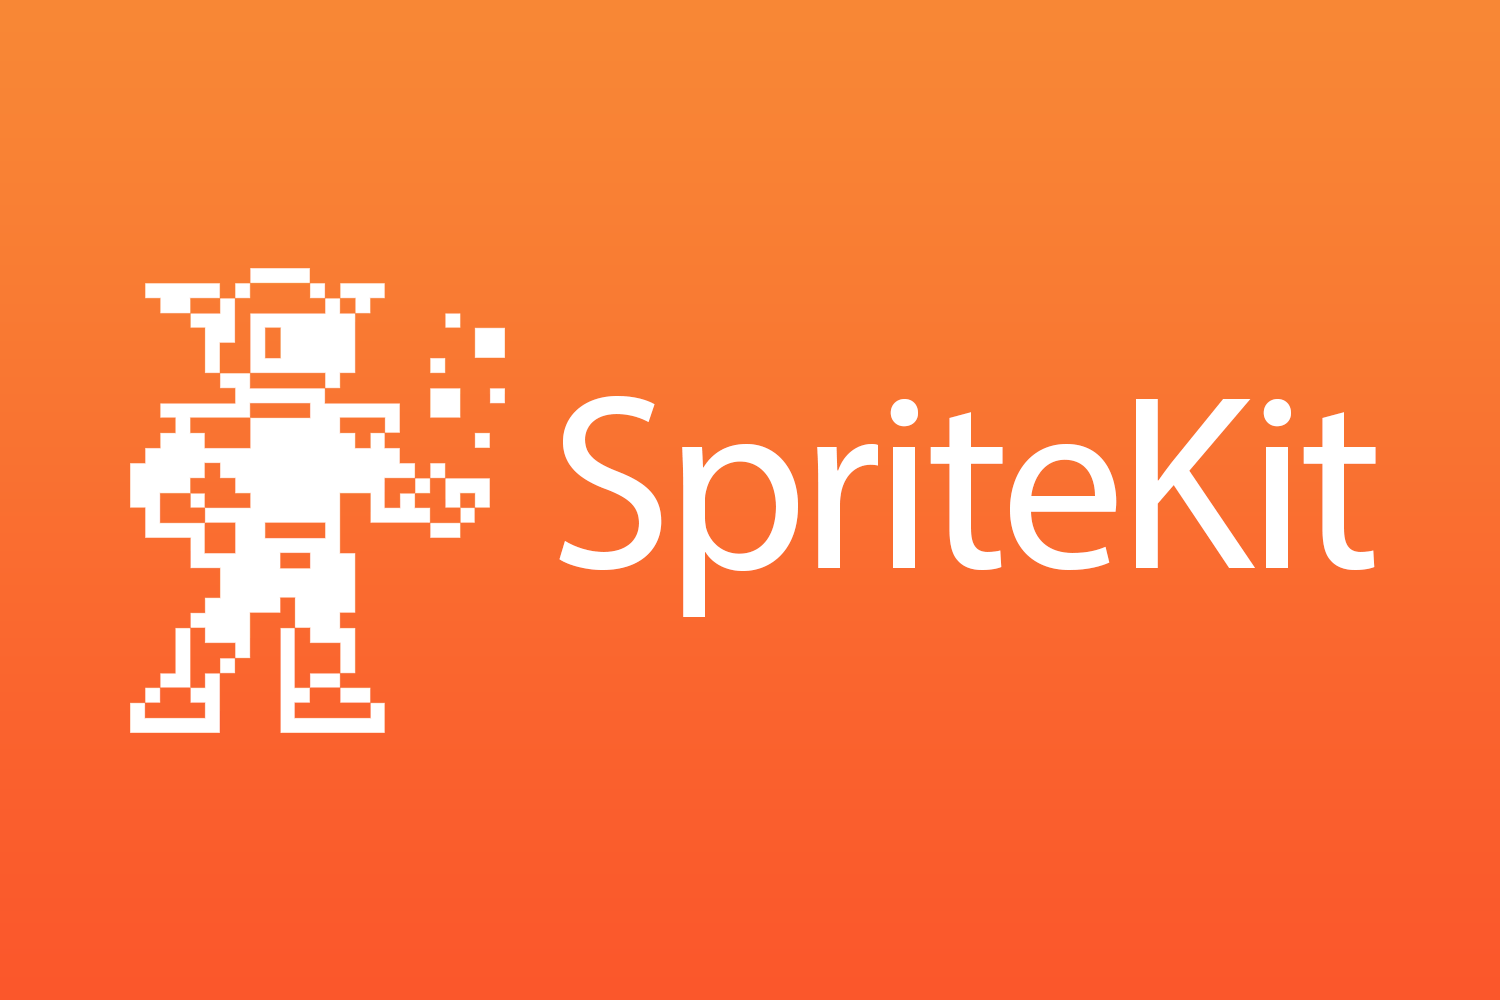 15 tips to optimize your SpriteKit game – Hacking with Swift